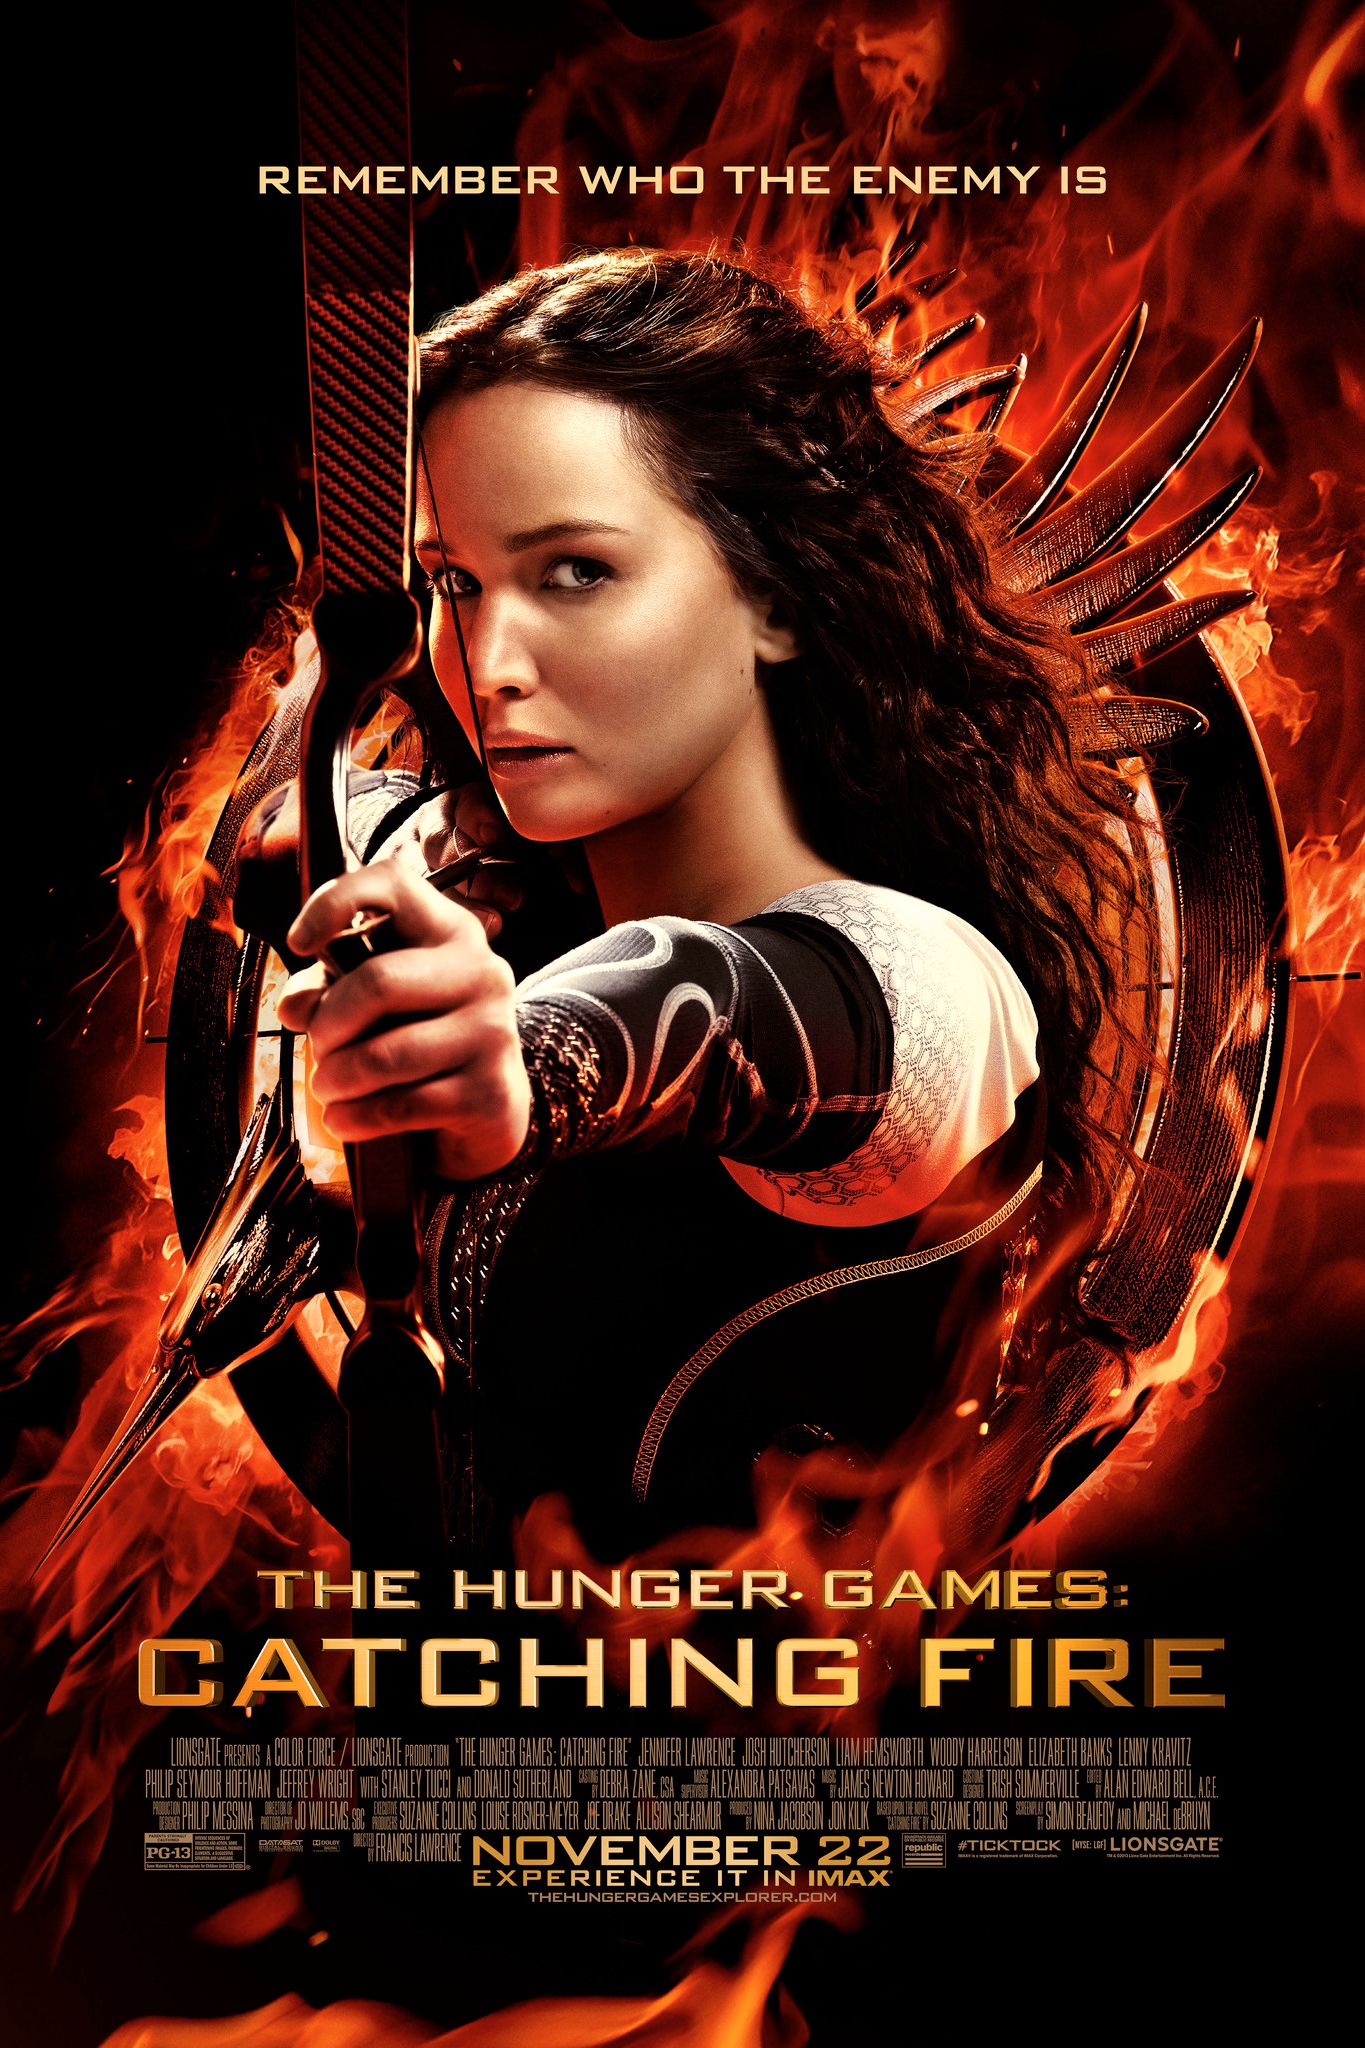 Jennifer Lawrence Wasn't Even There For One Of Katniss's Wildest ...